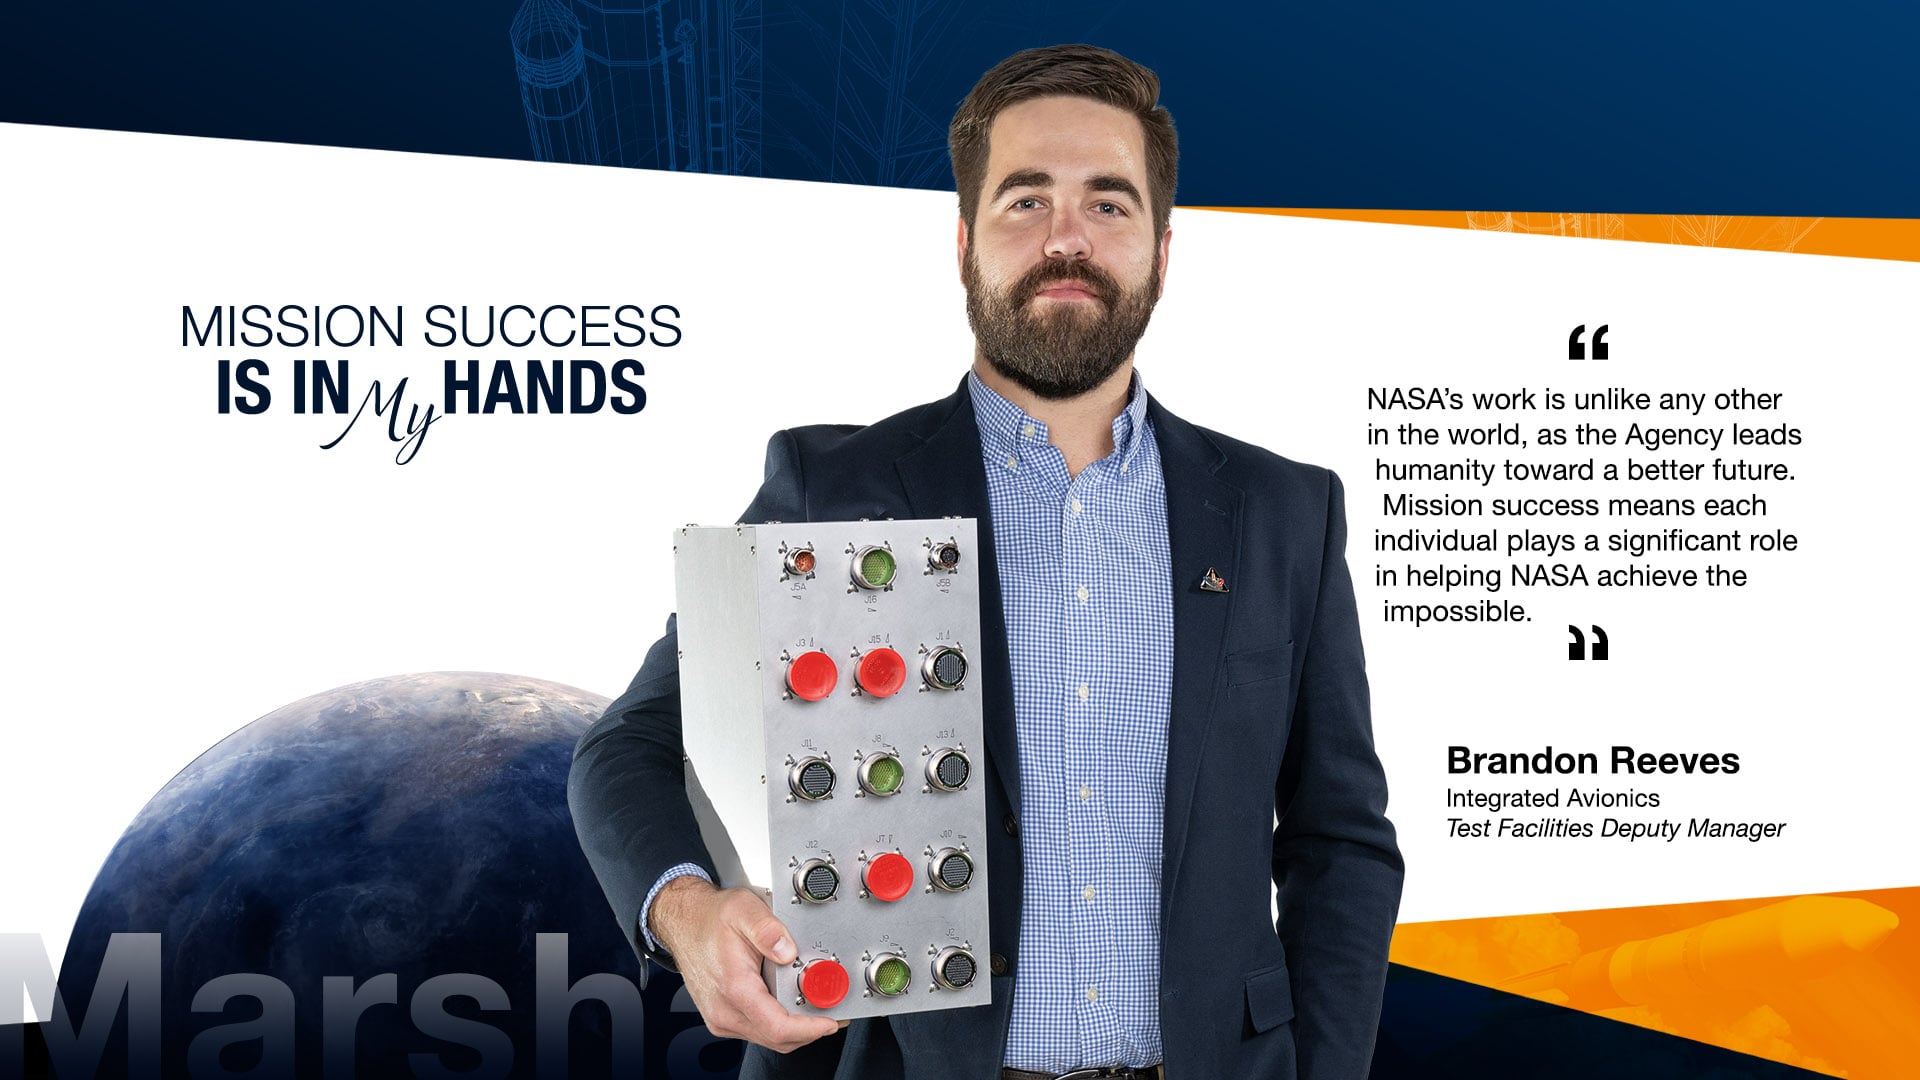 Brandon Reeves is the deputy manager of the Integrated Avionics Test Facility (IATF) at NASA’s Marshall Space Flight Center.